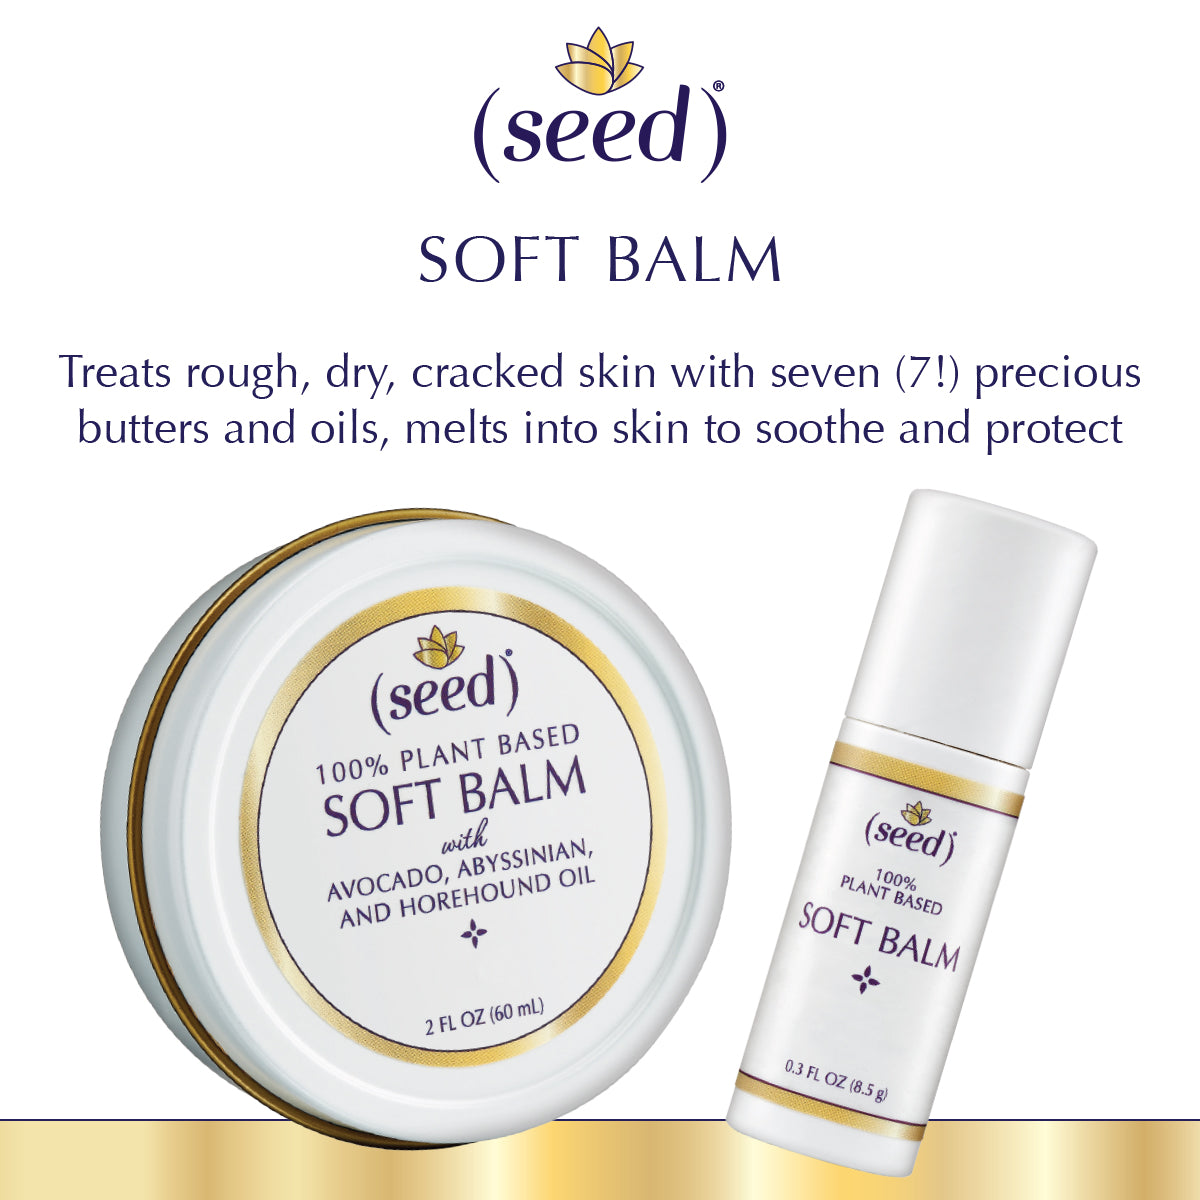 New Seed Soft Balms help treat rough hands, dry lips, cracked heels, and more